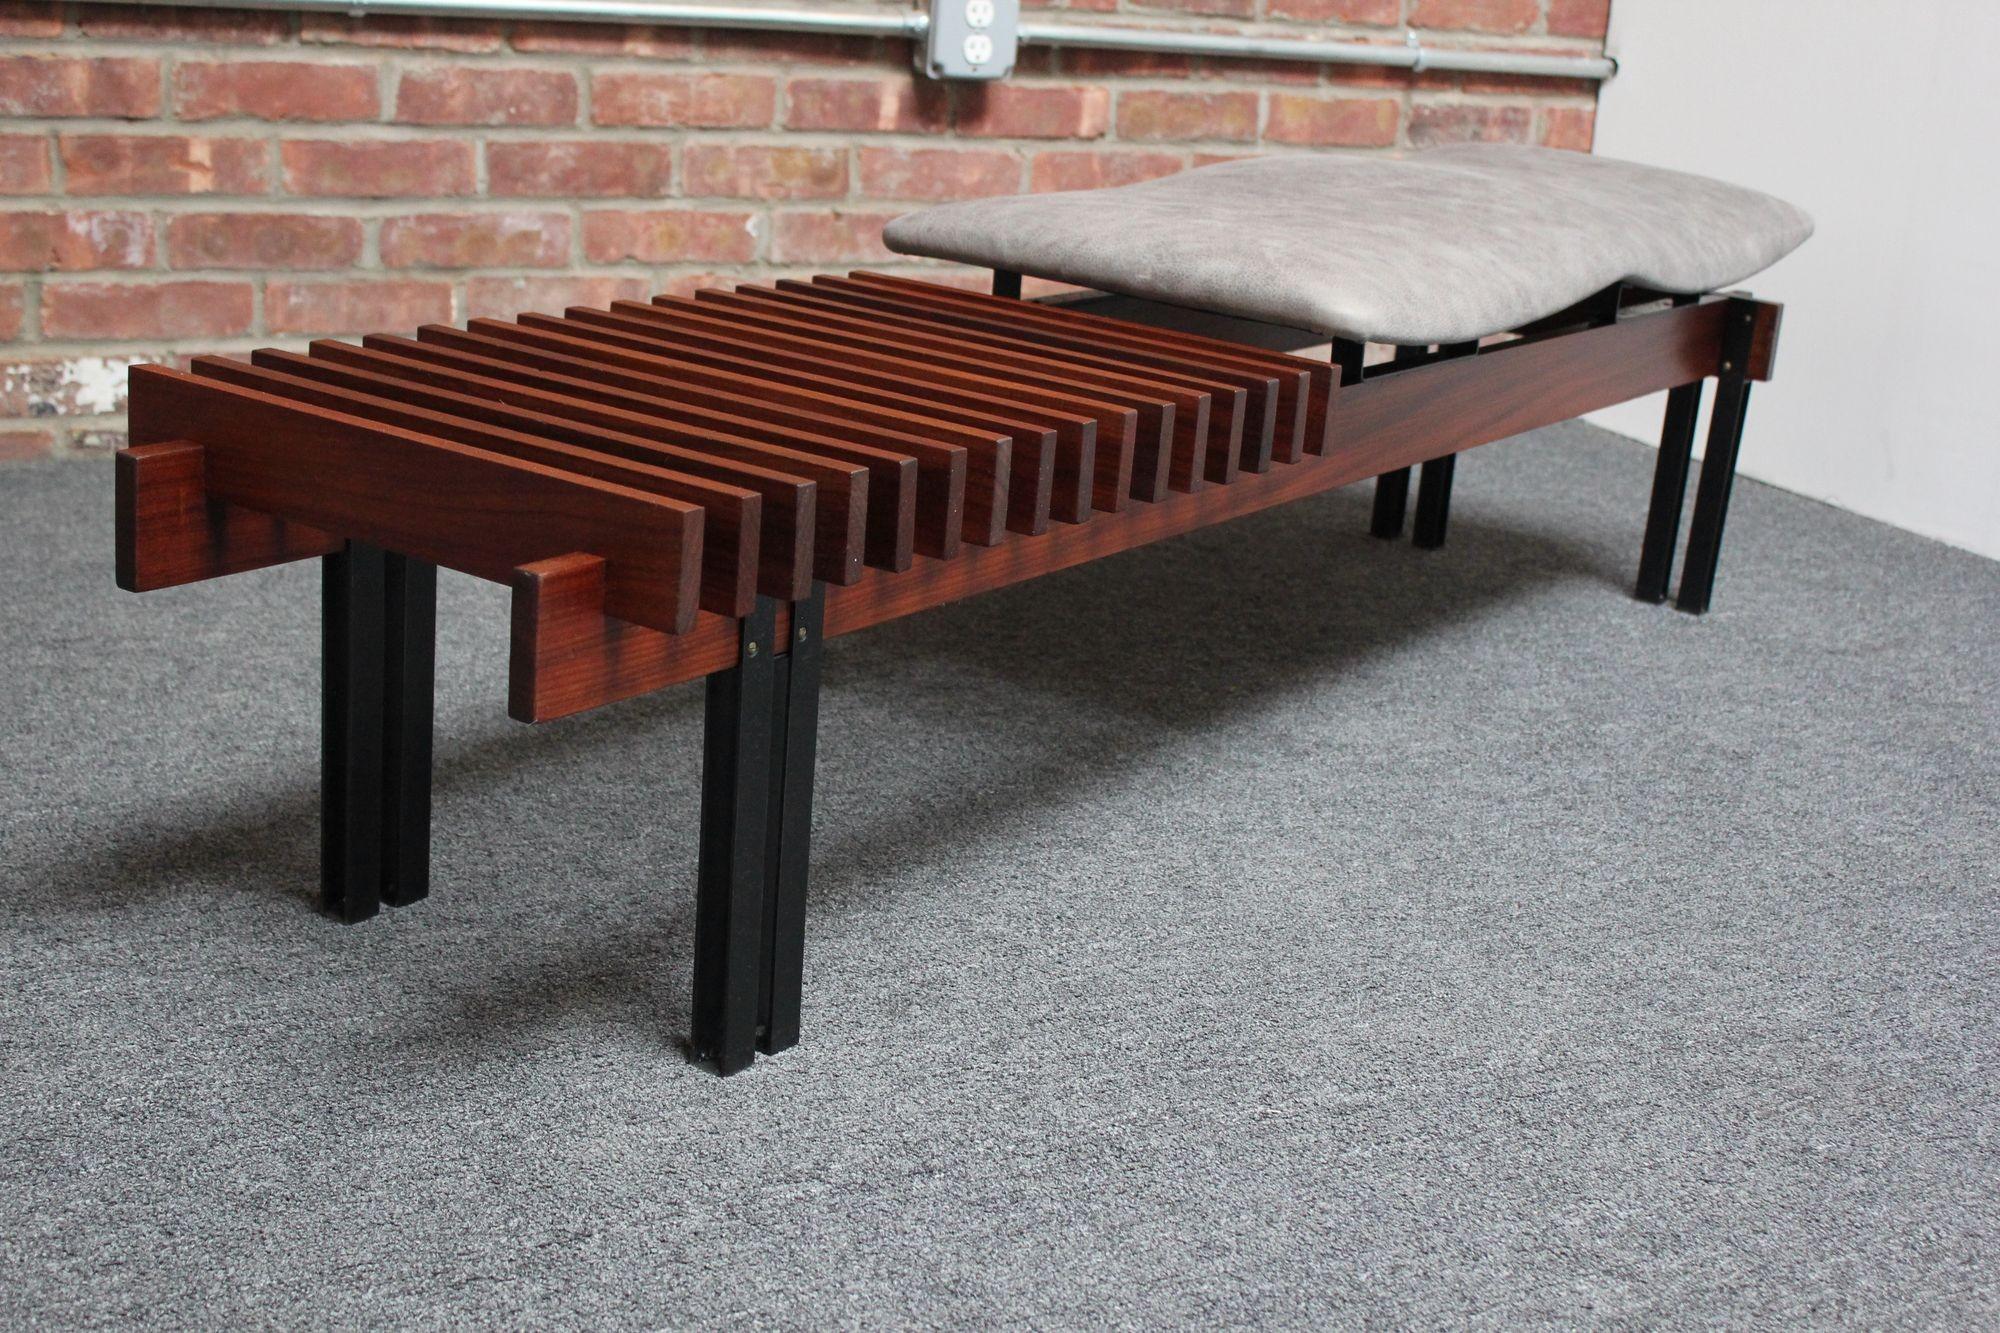 Italian Modernist Teak and Leather Bench by Inge and Luciano Rubino For Sale 12